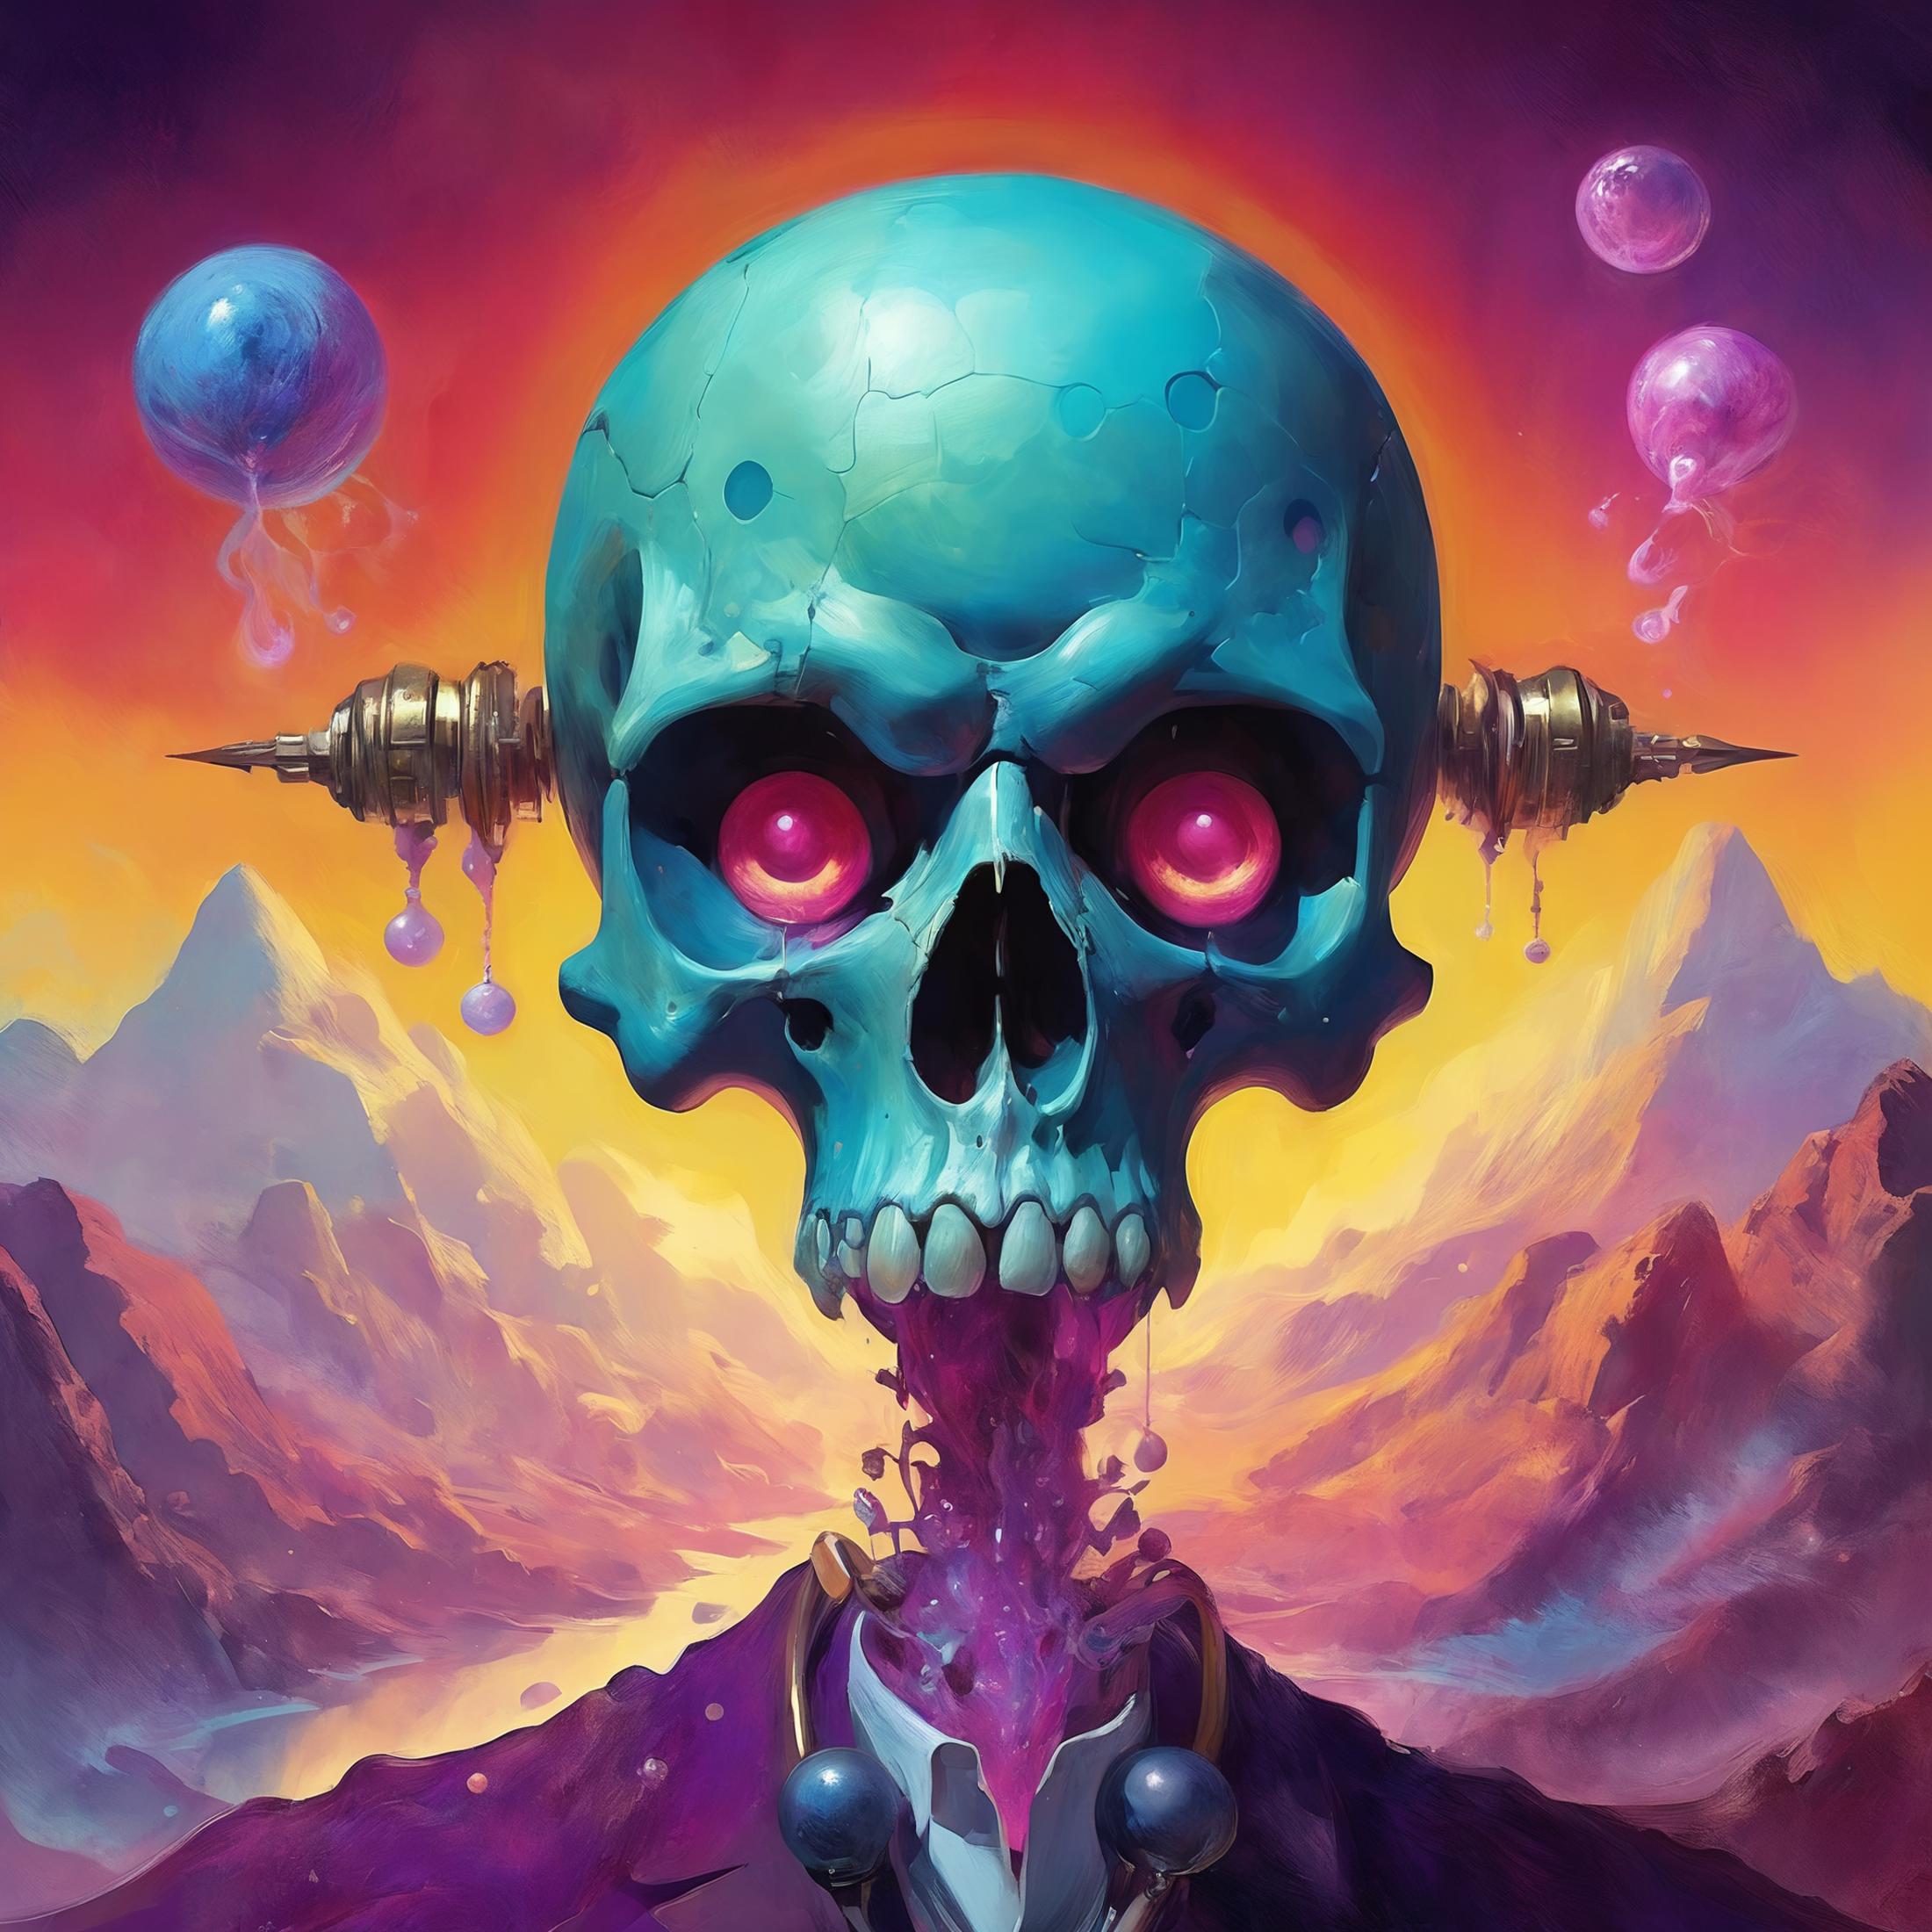 A blue skull with red eyes and a purple tongue, surrounded by bubbles and a mountainous background.